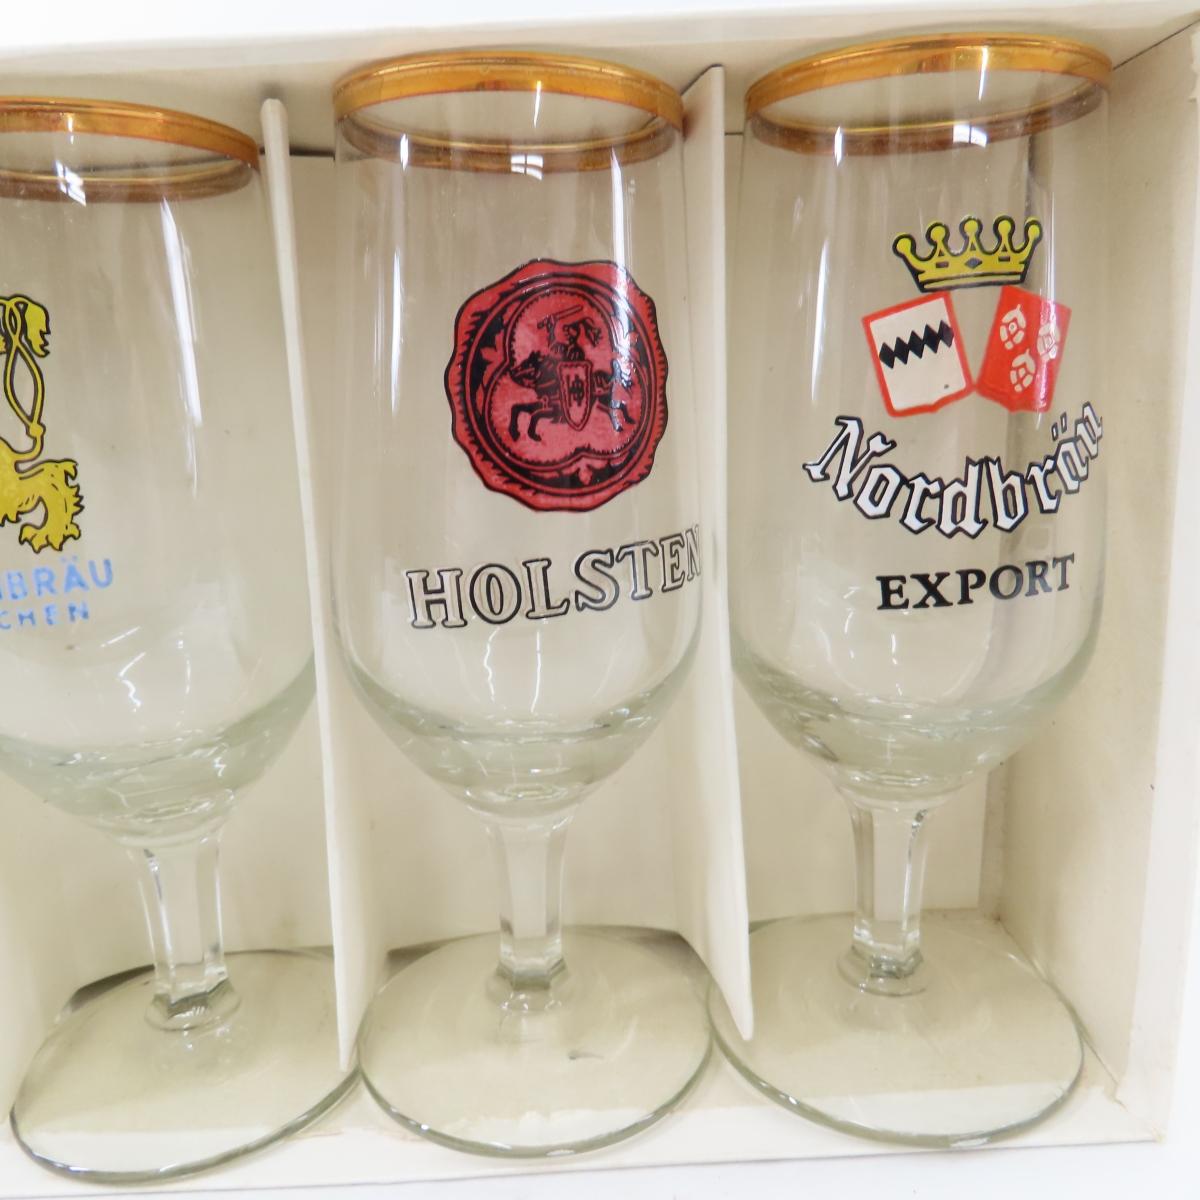 2 sets of 6 German beer glasses by Ruhrglass